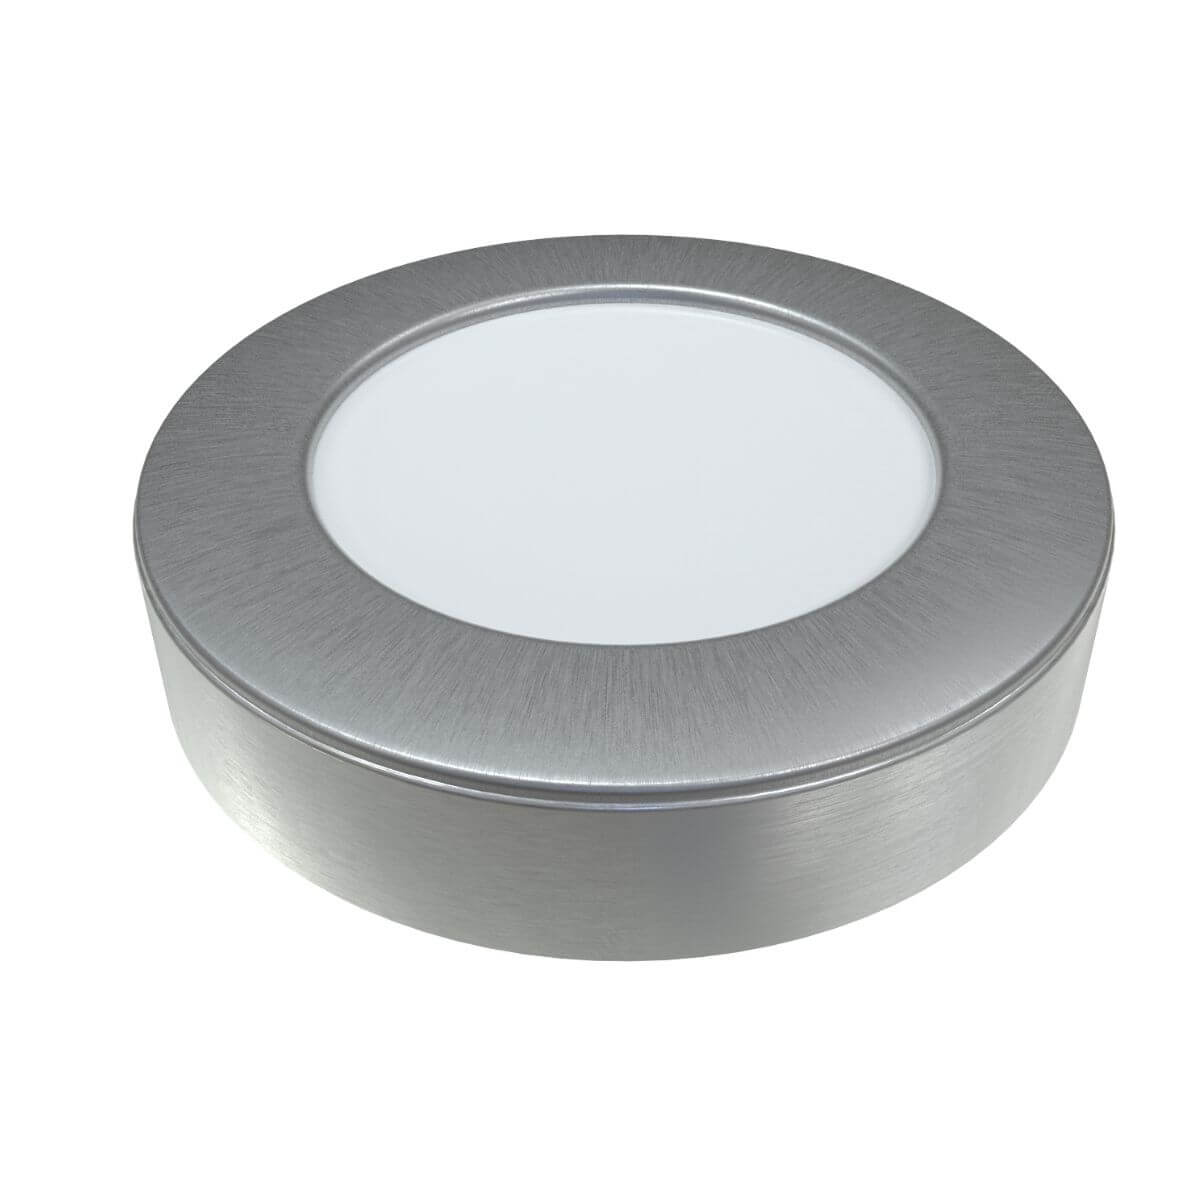 View Surface Mounted LED Under Cabinet Light Dotless Design information